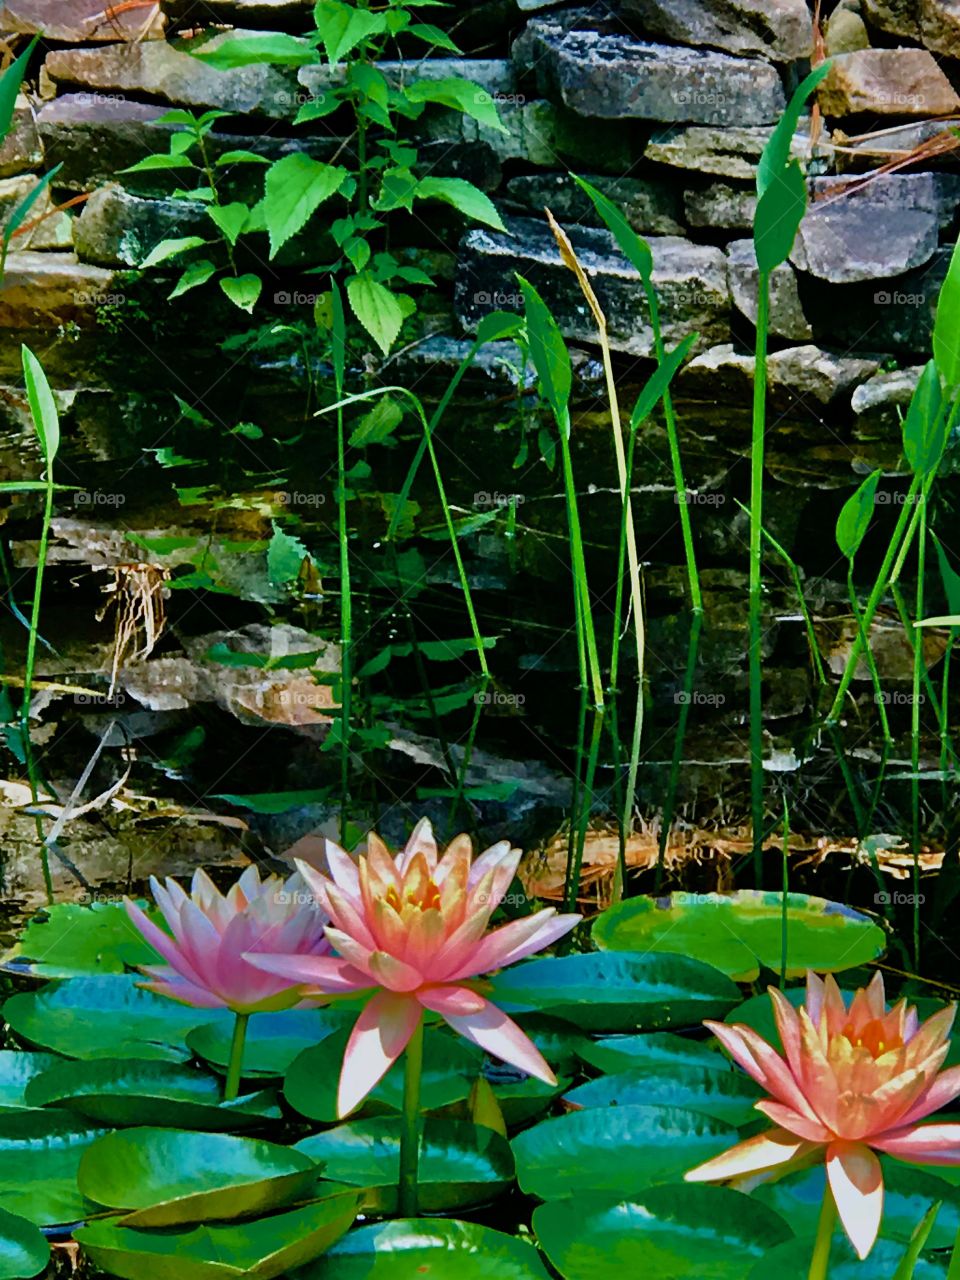 Waterlily tranquility 